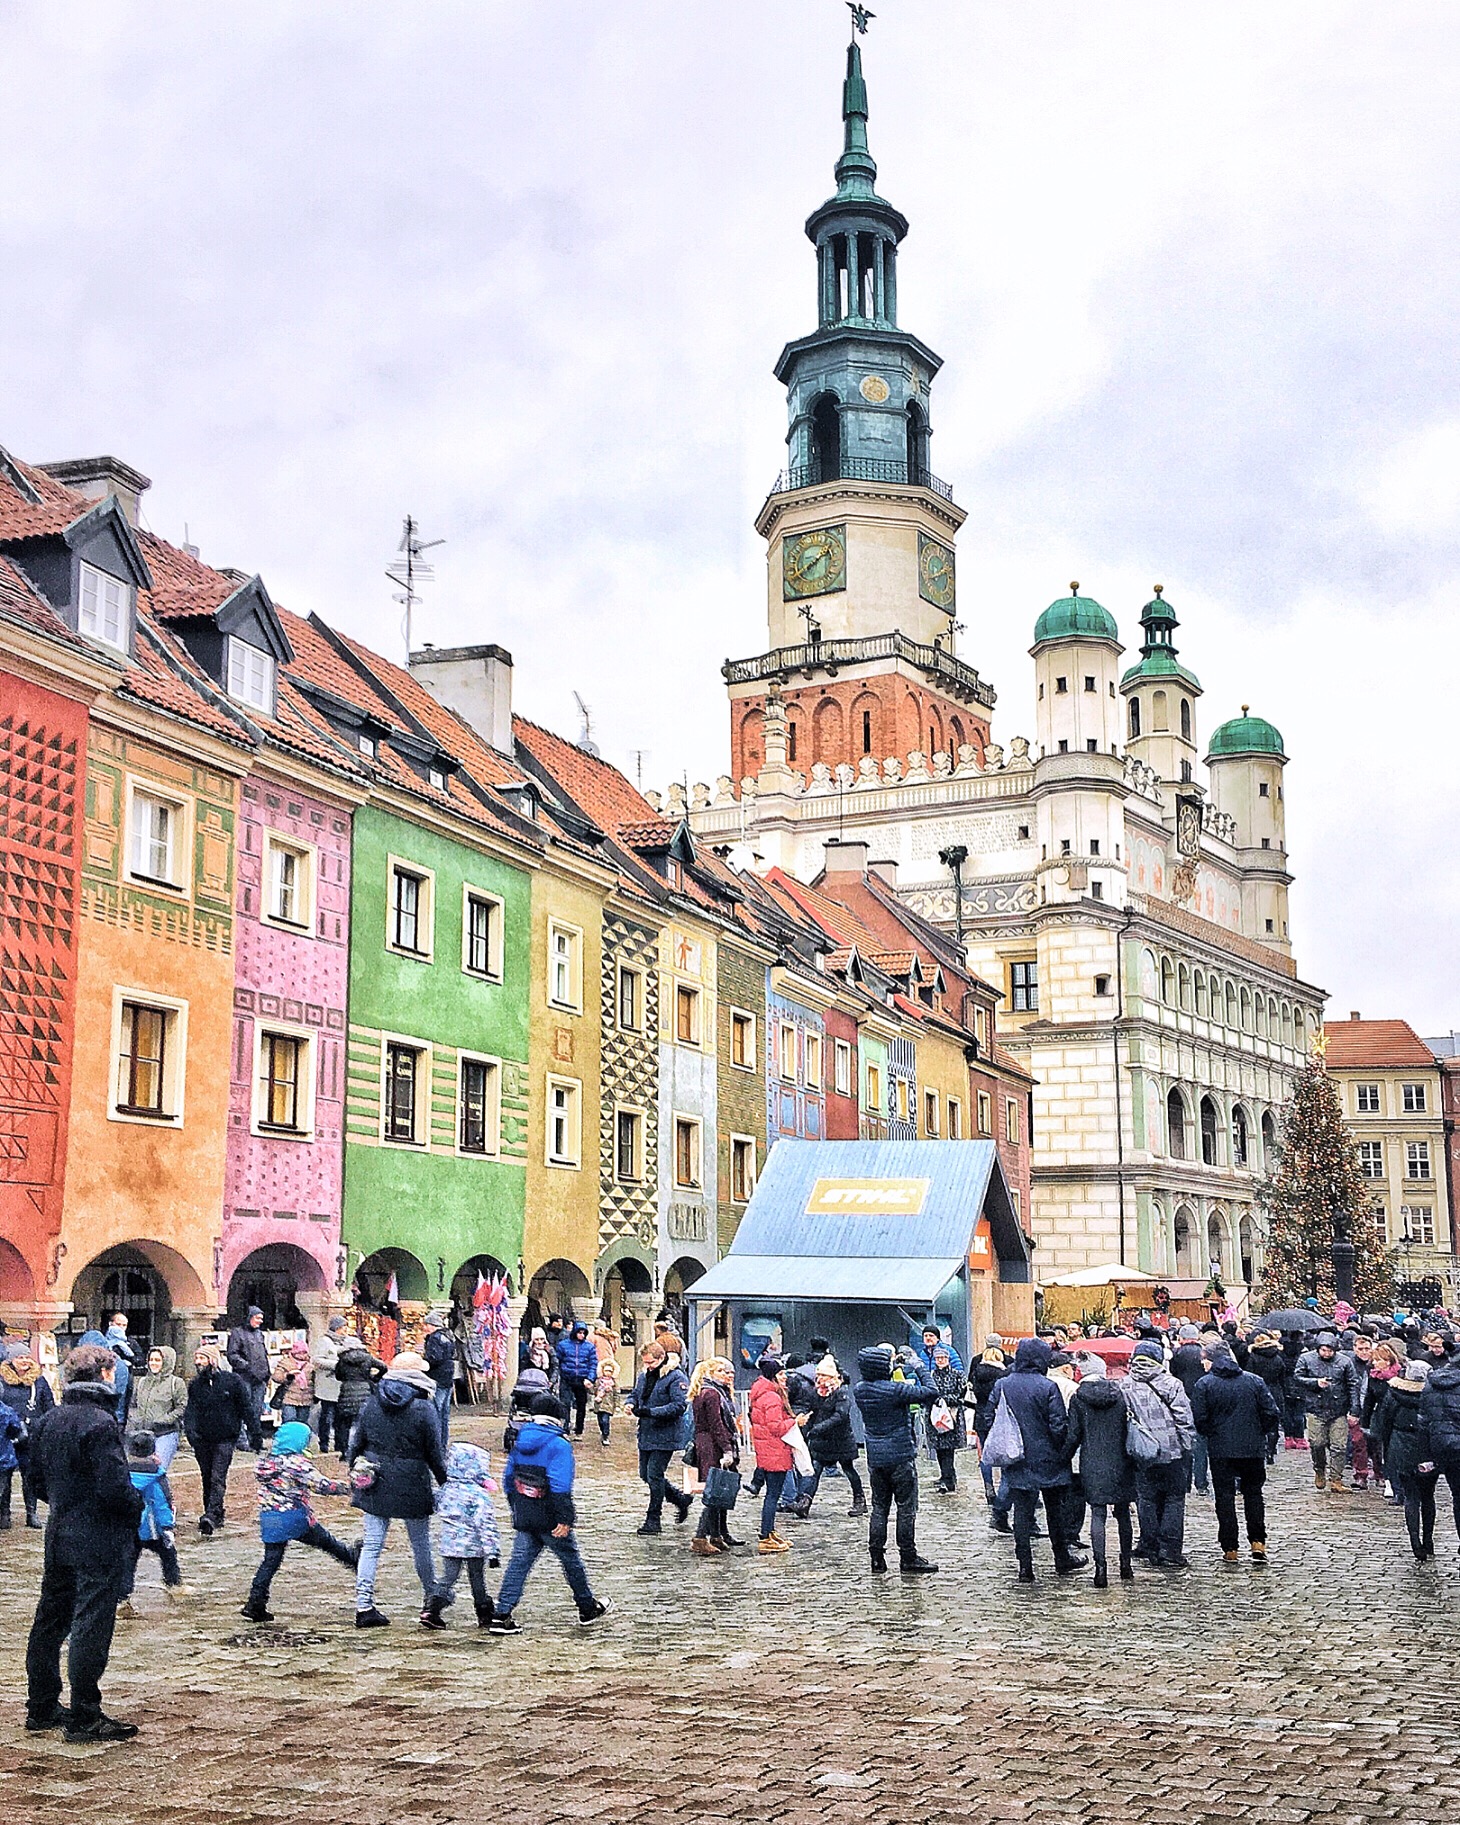 Lively streets of Old Market Square Poznan